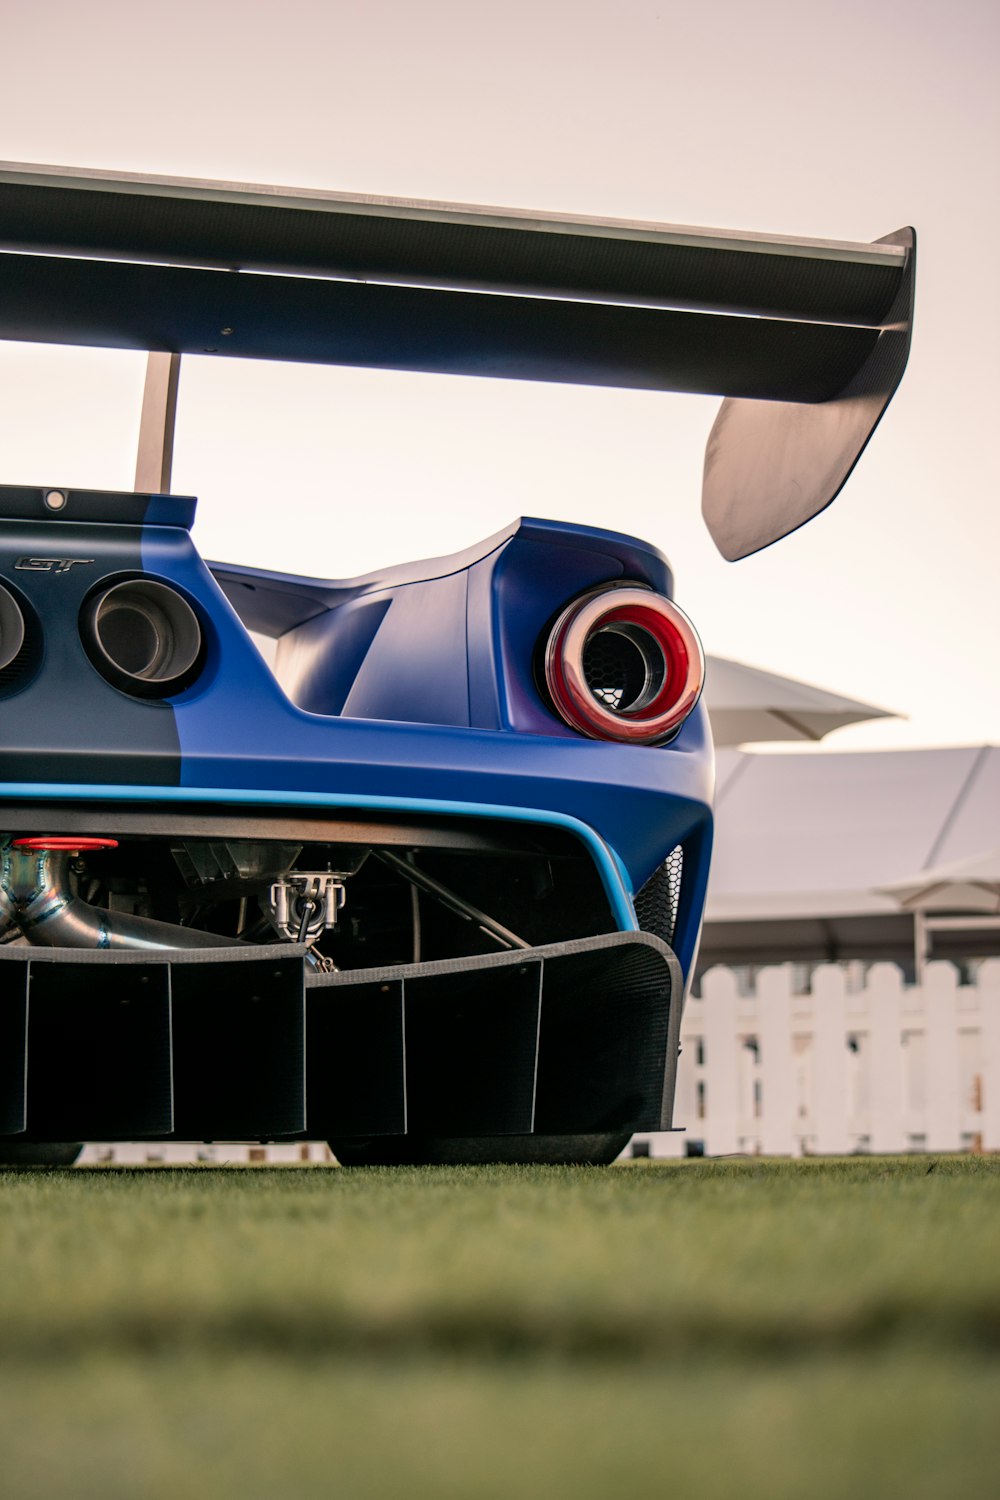 the rear end of a blue sports car